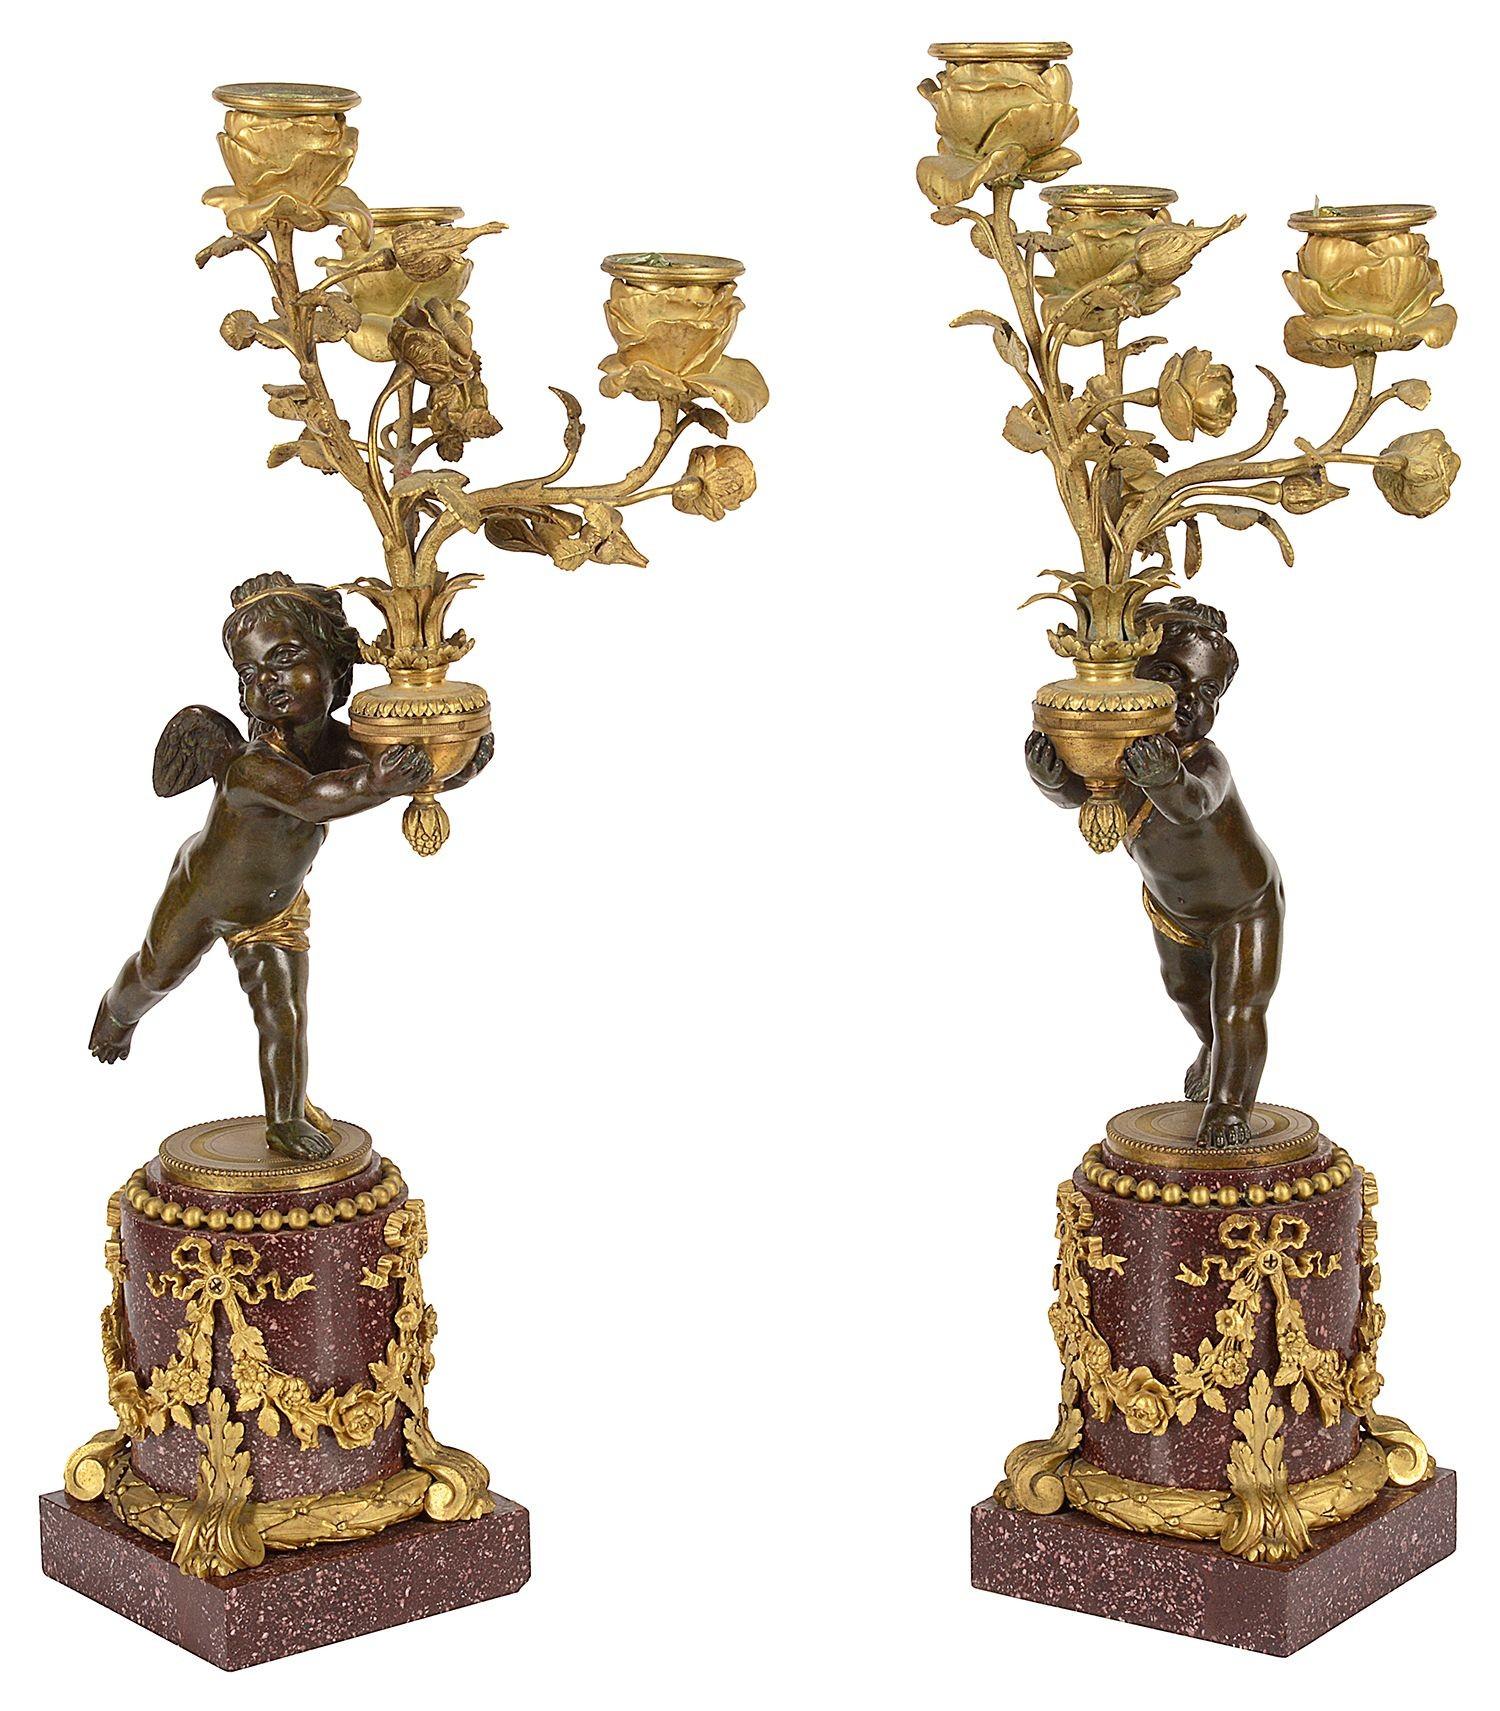 A rare and fine quality pair of 19th Century gilded ormolu, patinated bronze   cherubs, each holding a three branch scrolling foliate candelabra with floral sconces, raised on these wondereful Porphyry pedestal bases with ormolu swag mounts.